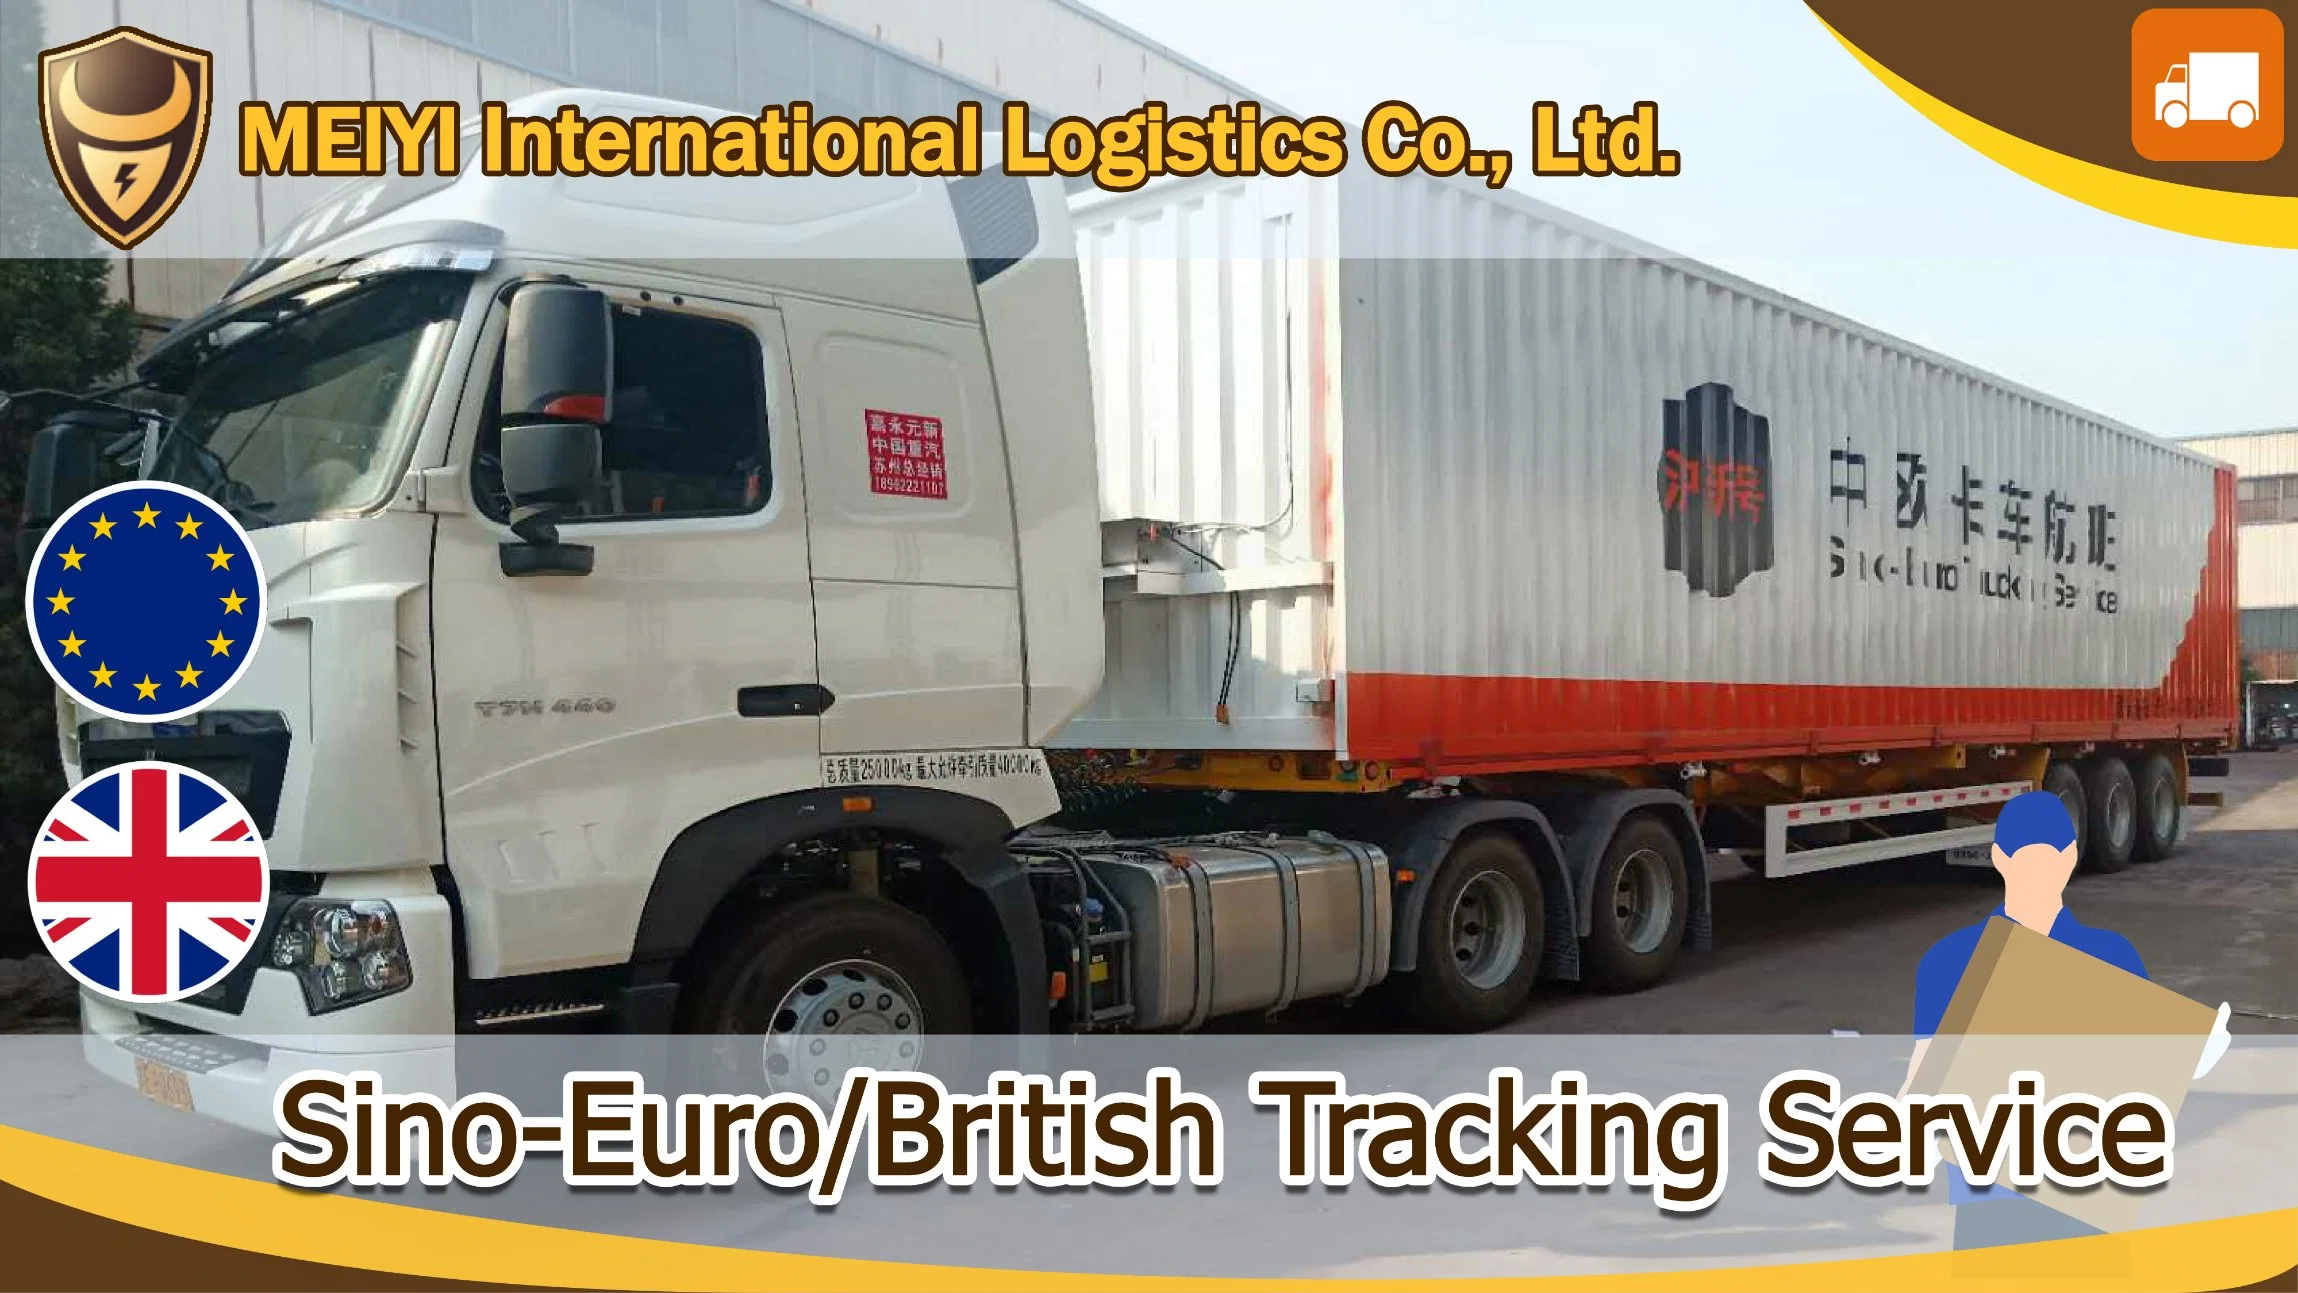 DDP Sino-Euro Trucking Service: To Czech From China by Forwarder logistics shipping agent alibaba express